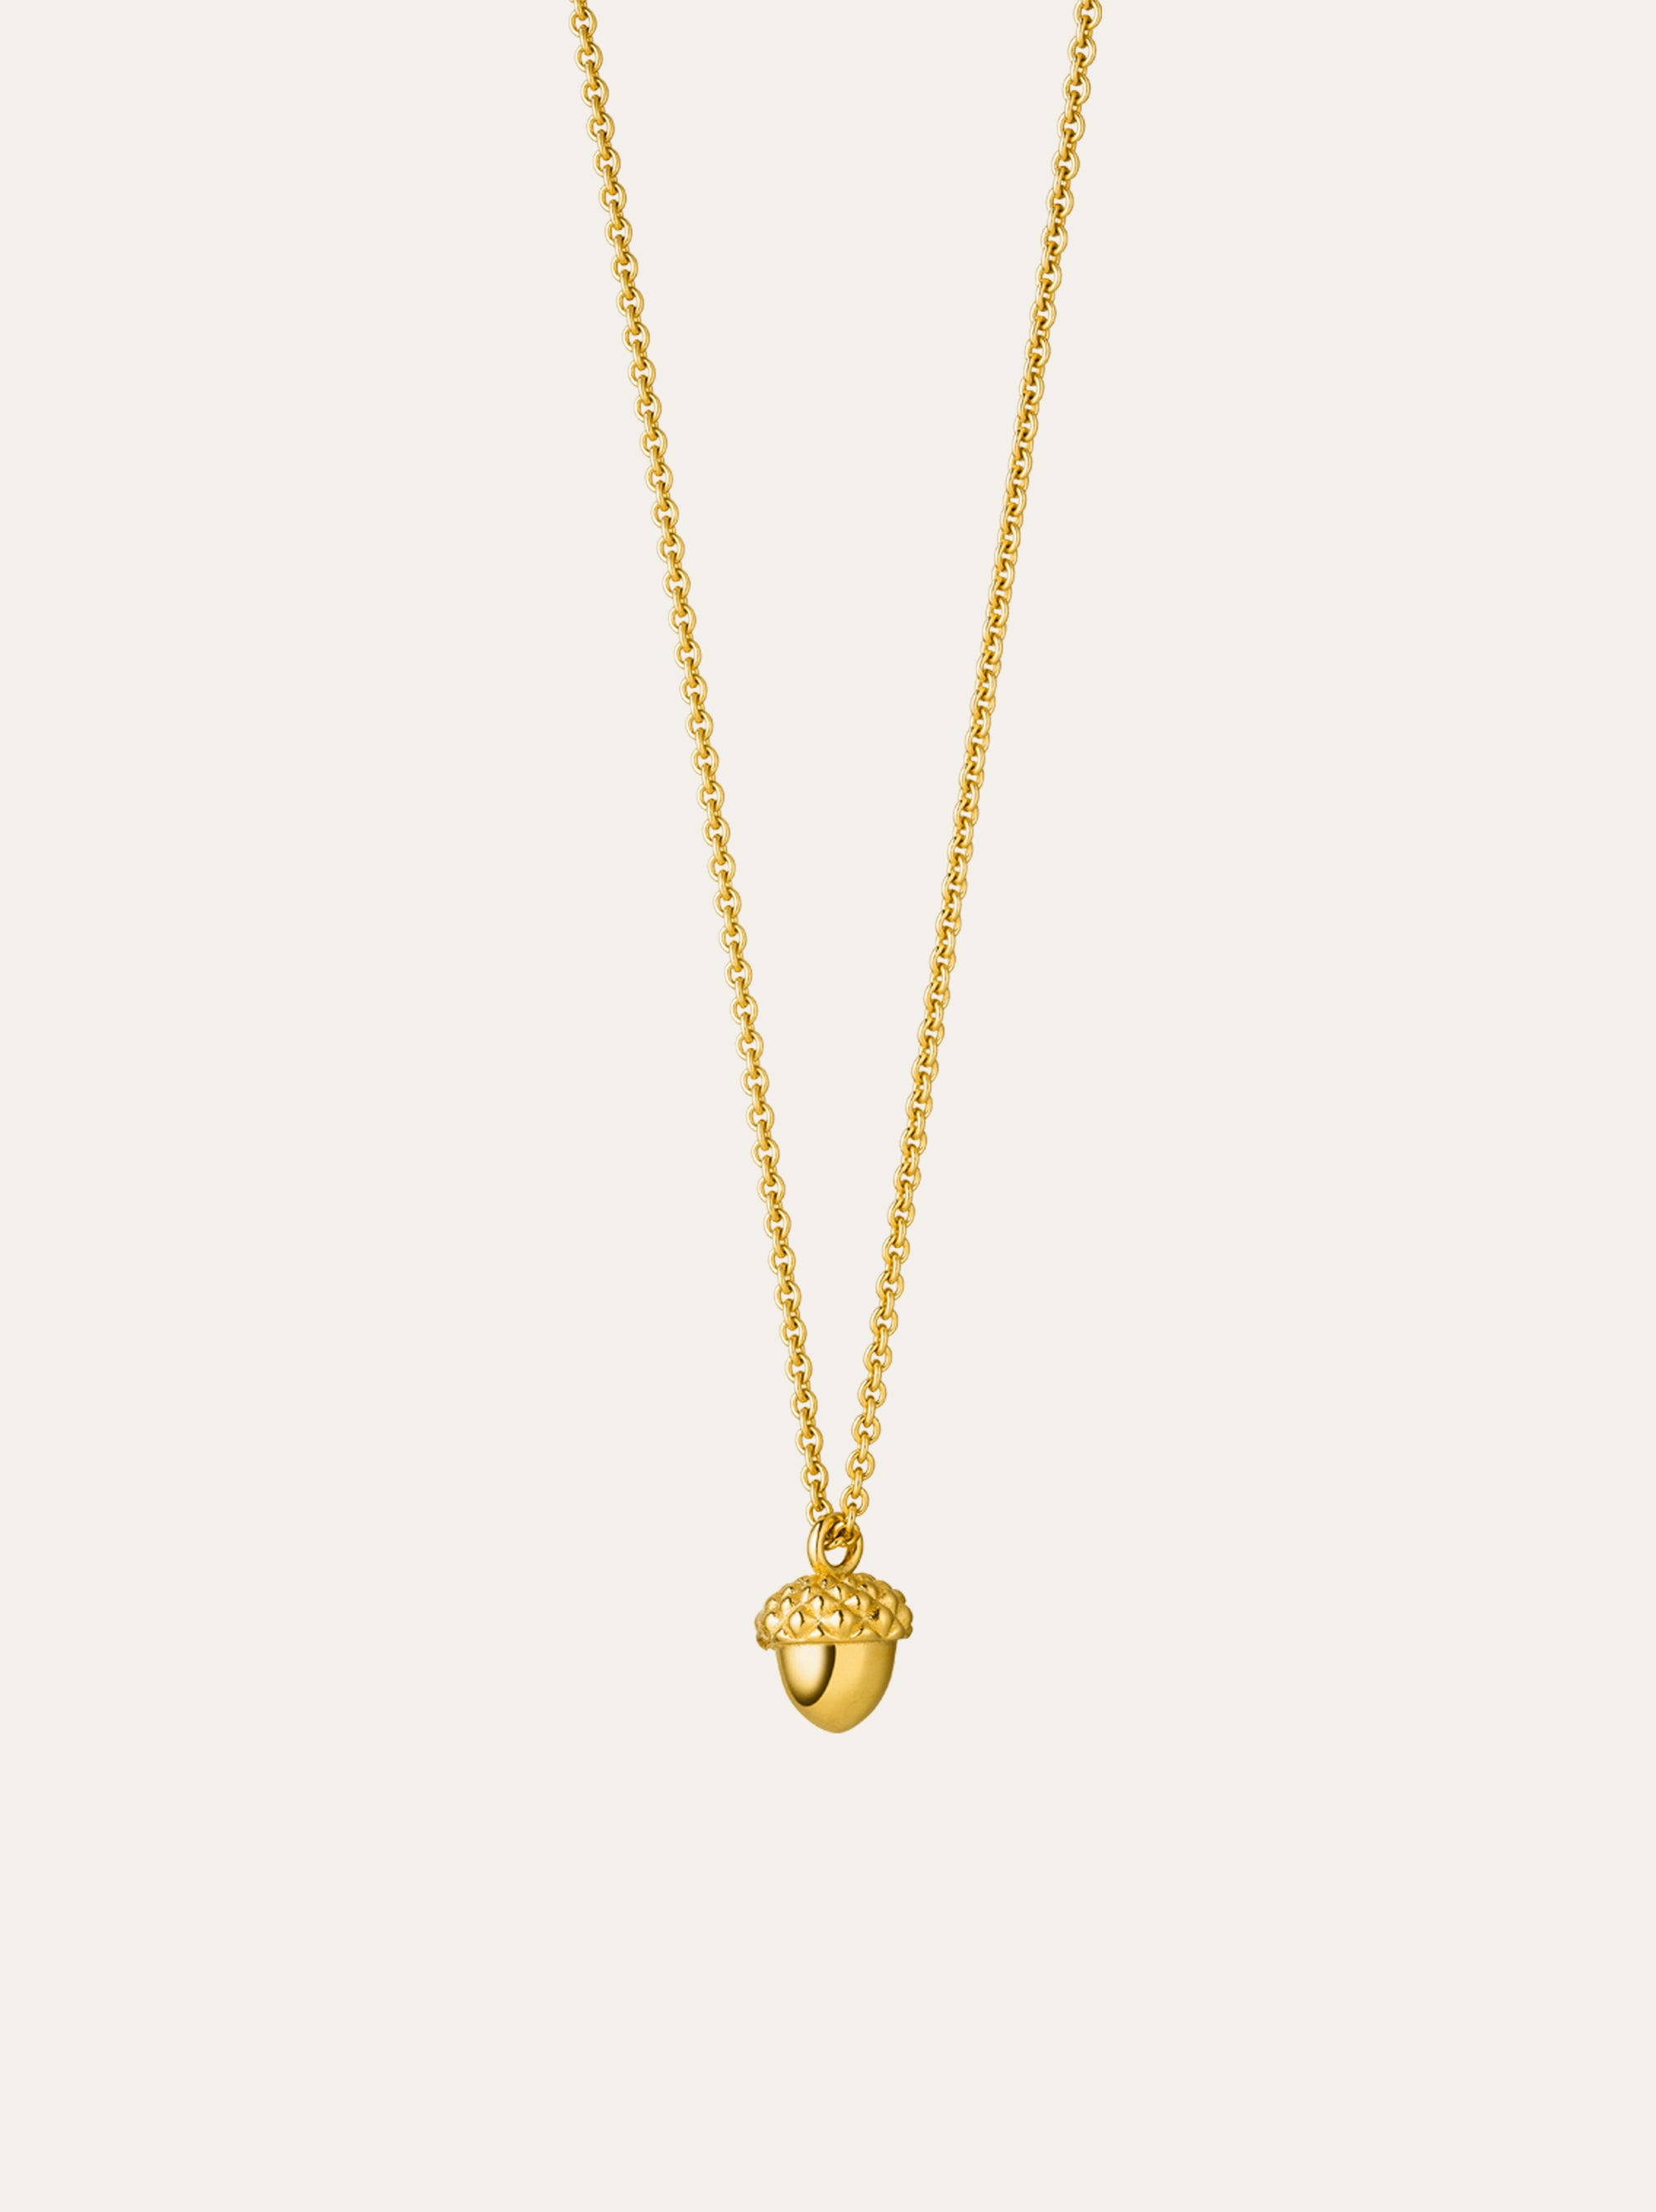 Idamari Acorn Charm Necklace: Sterling silver with 18ct gold plating, delicate acorn pendant on 45 cm chain, toggle clasp